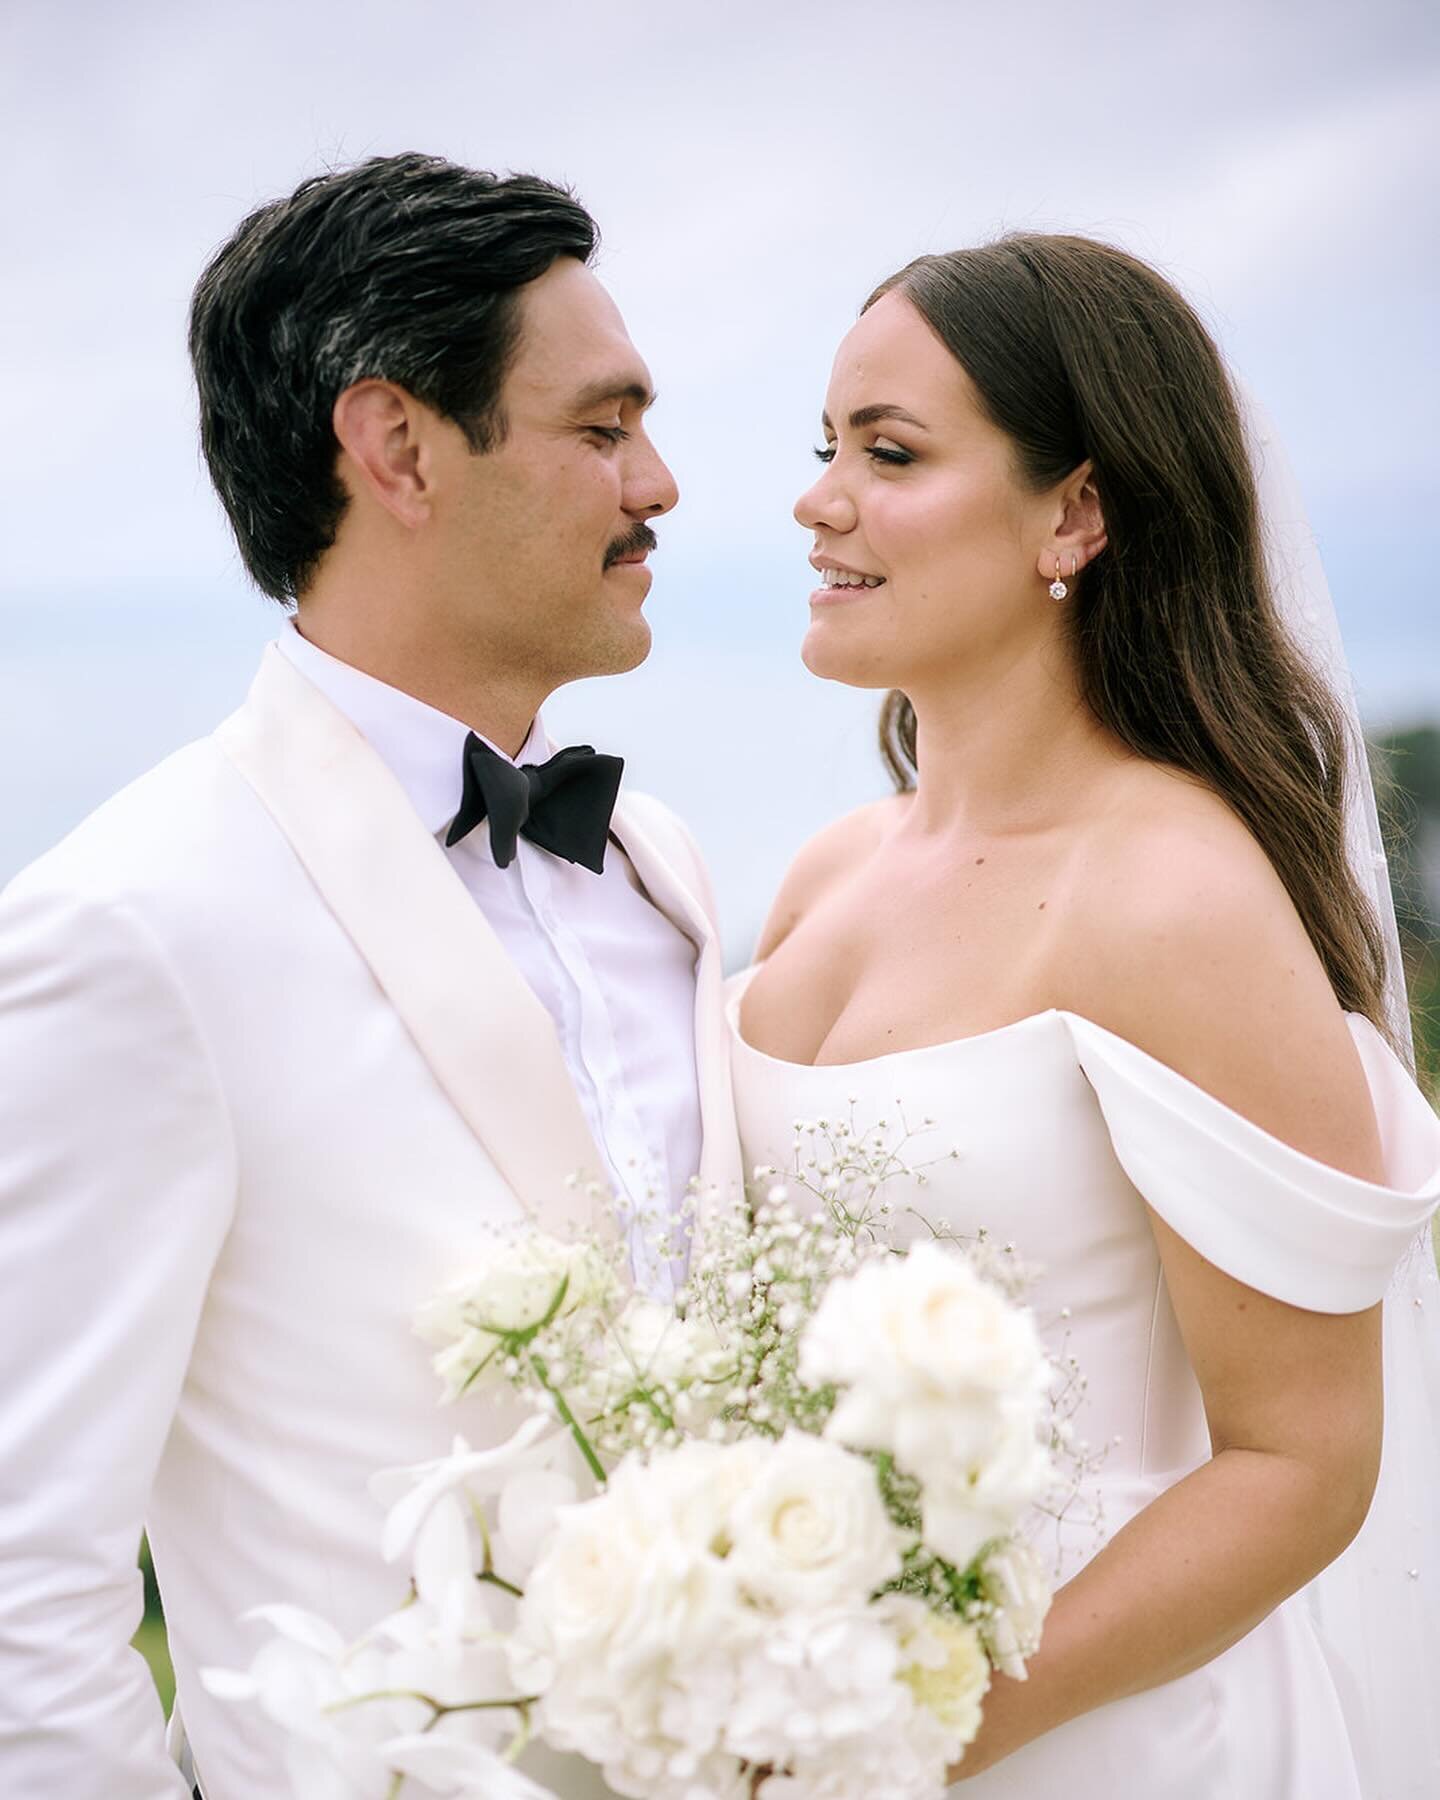 We love a destination wedding! Stunning 2024 bride, Becca got married at The Glass House in Raglan a few weeks ago. Makeup on bridal party of five by Dani Froude Makeup. Taking bookings for 2025 season now.